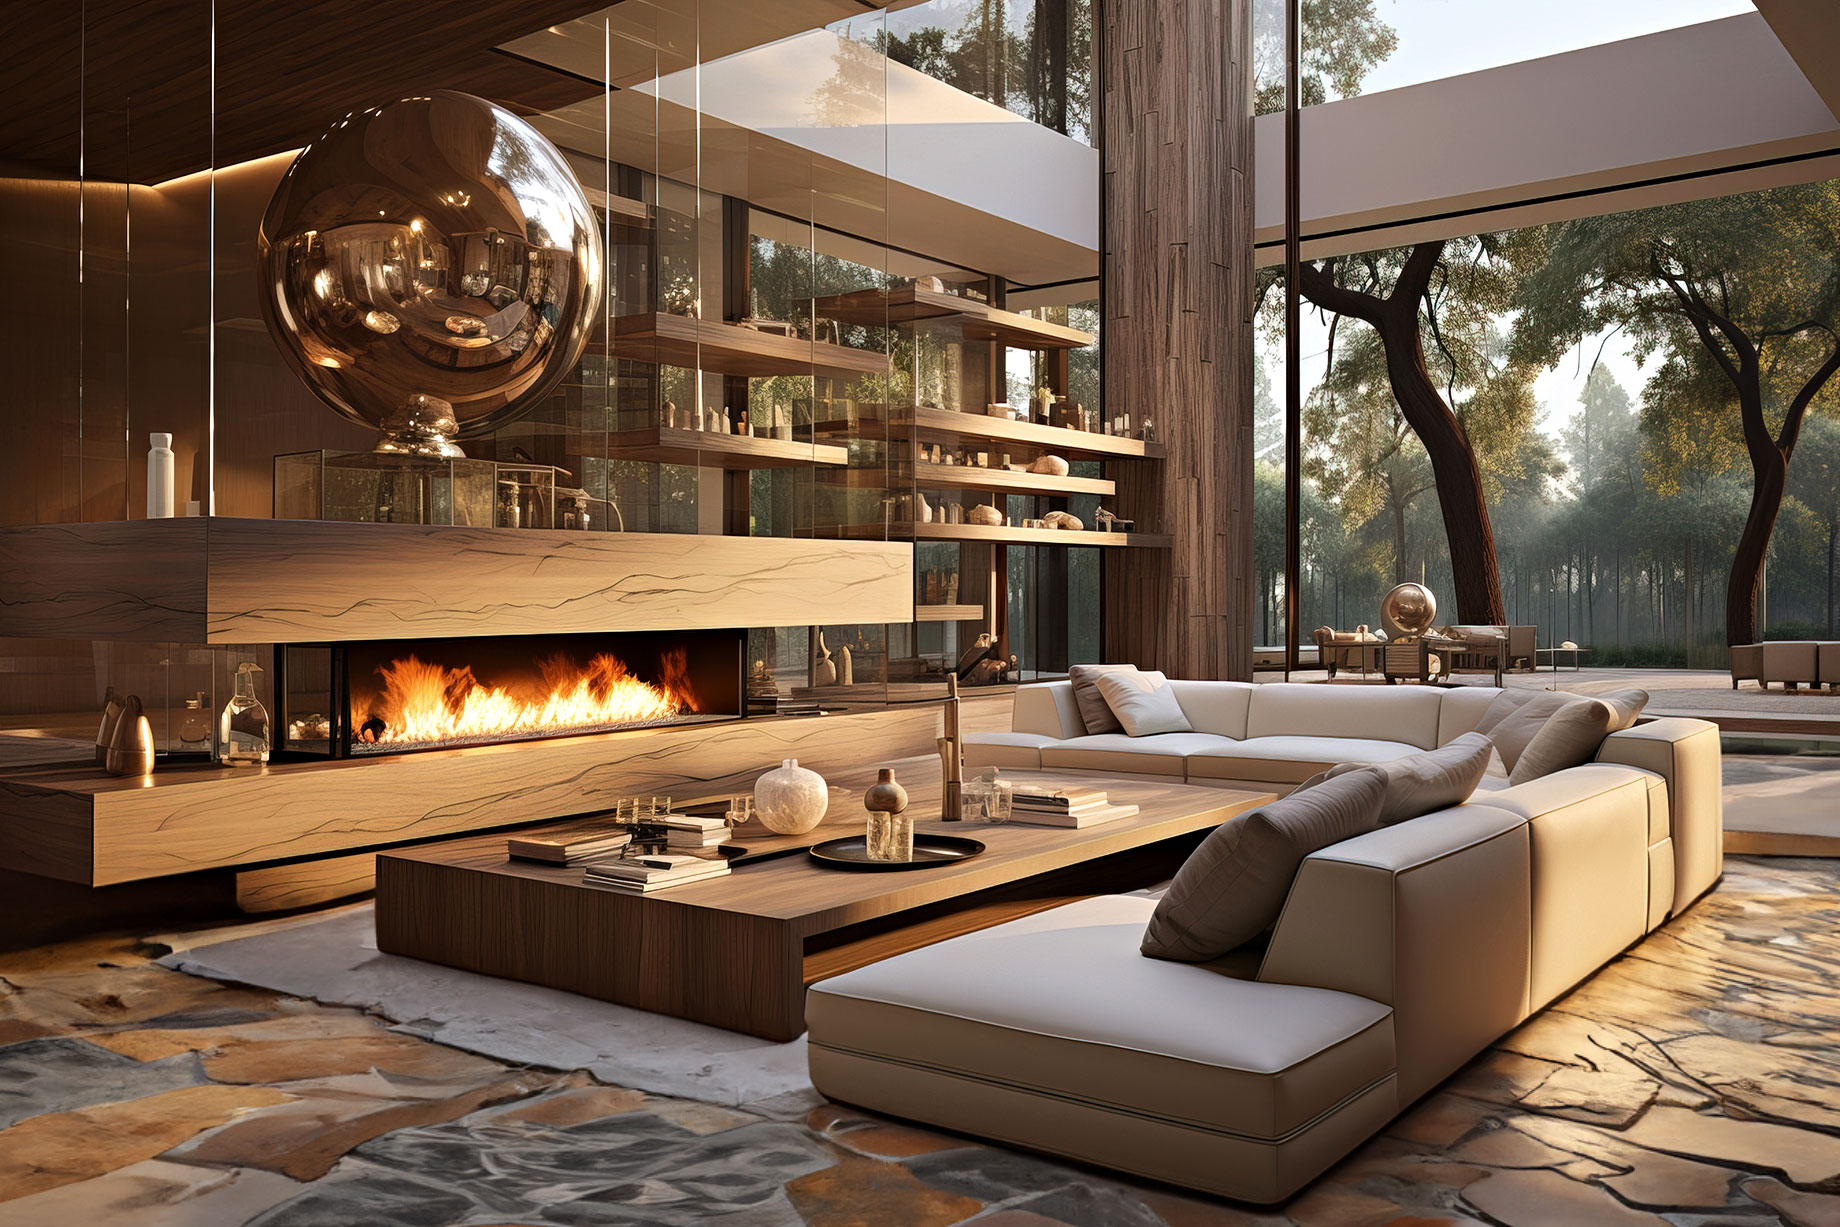 Vintage Modern Fusion – Luxury Modern Living Room with a Fireplace, Sofa, and Opulent Decor